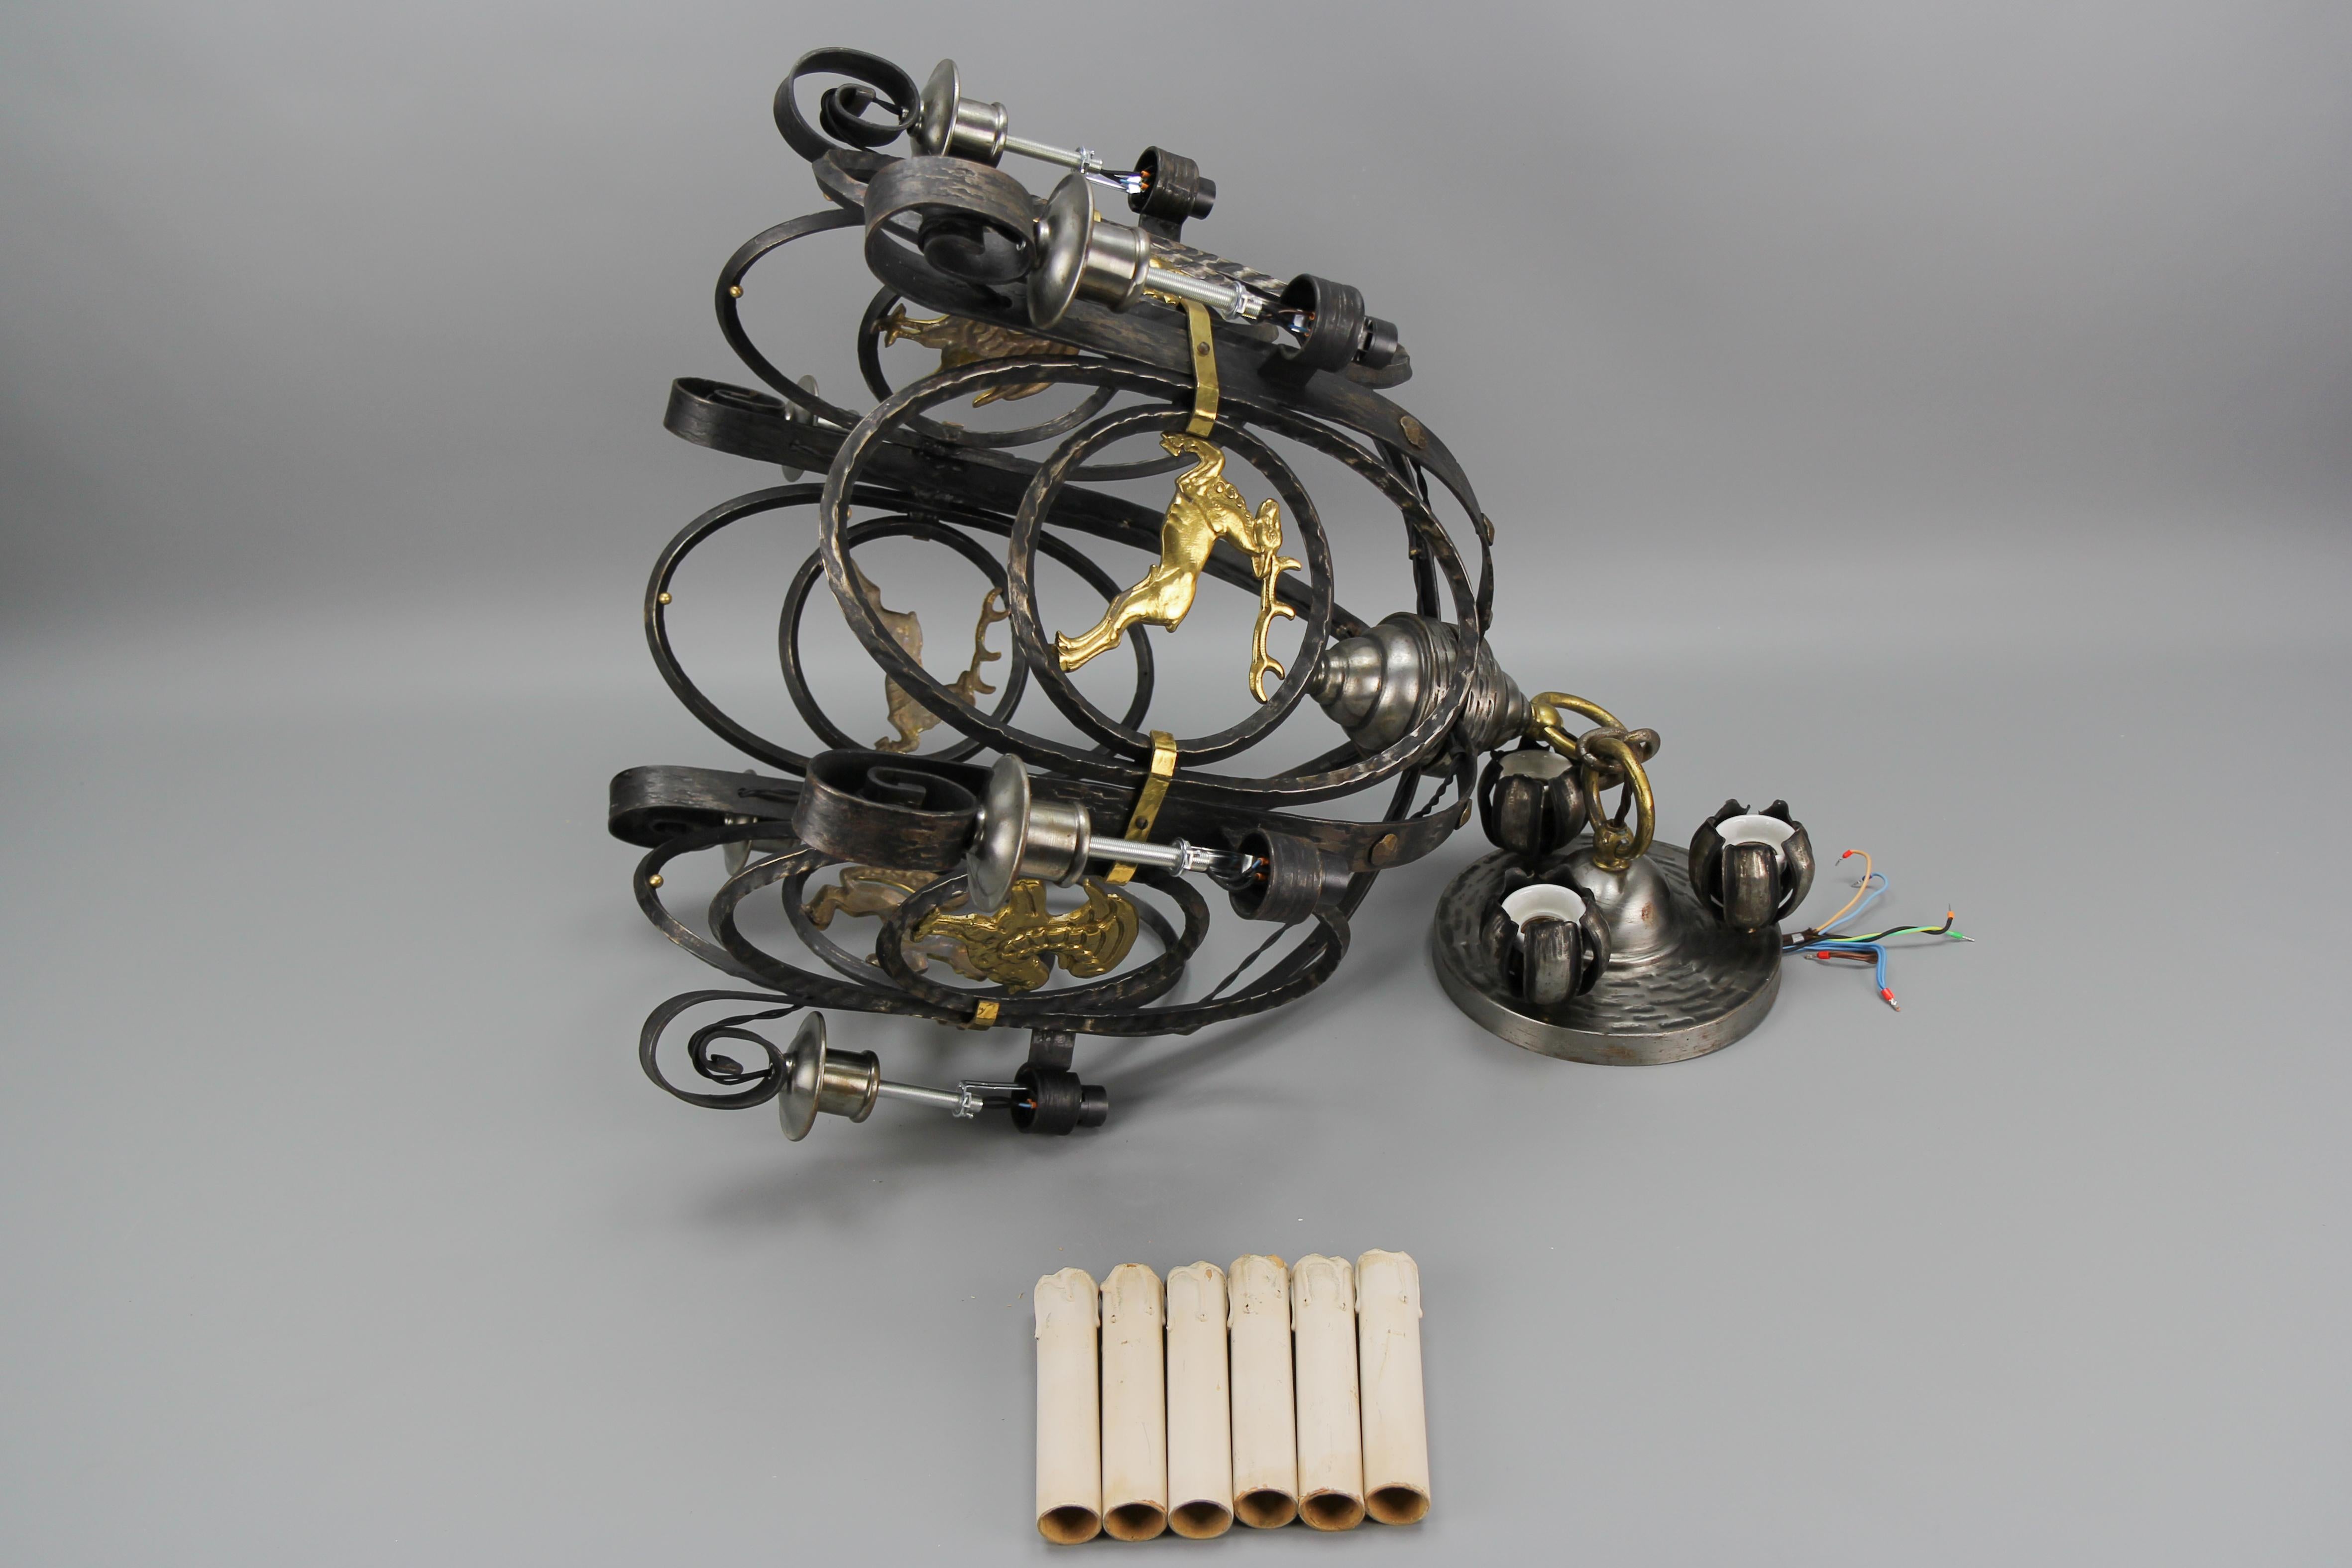 German Art Deco Nine-Light Wrought Iron and Brass Chandelier with Animals, 1920s For Sale 11